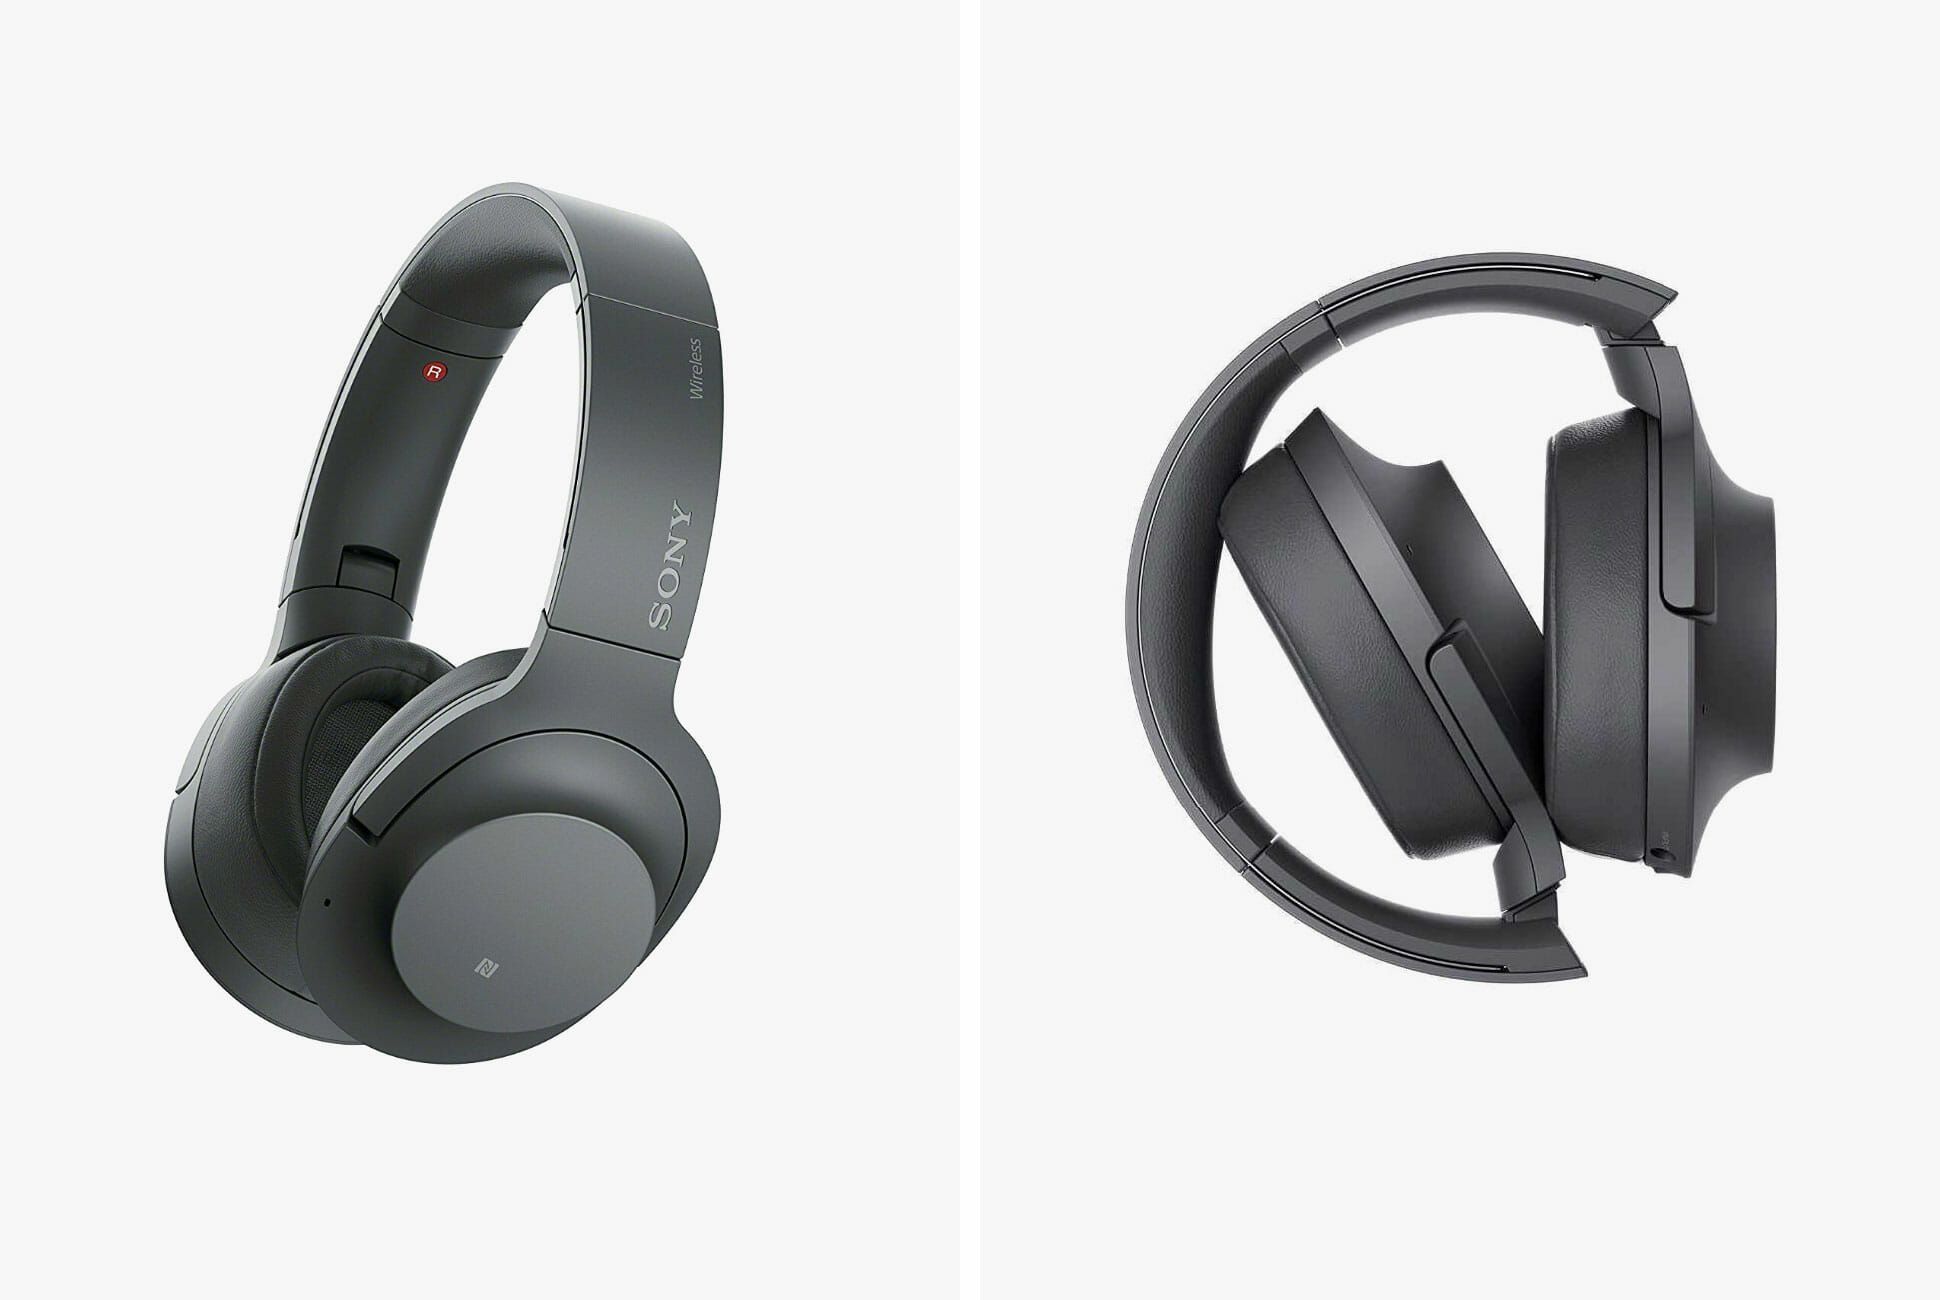 Sony's $300 Noise-Canceling Headphones Are Just $90 on eBay